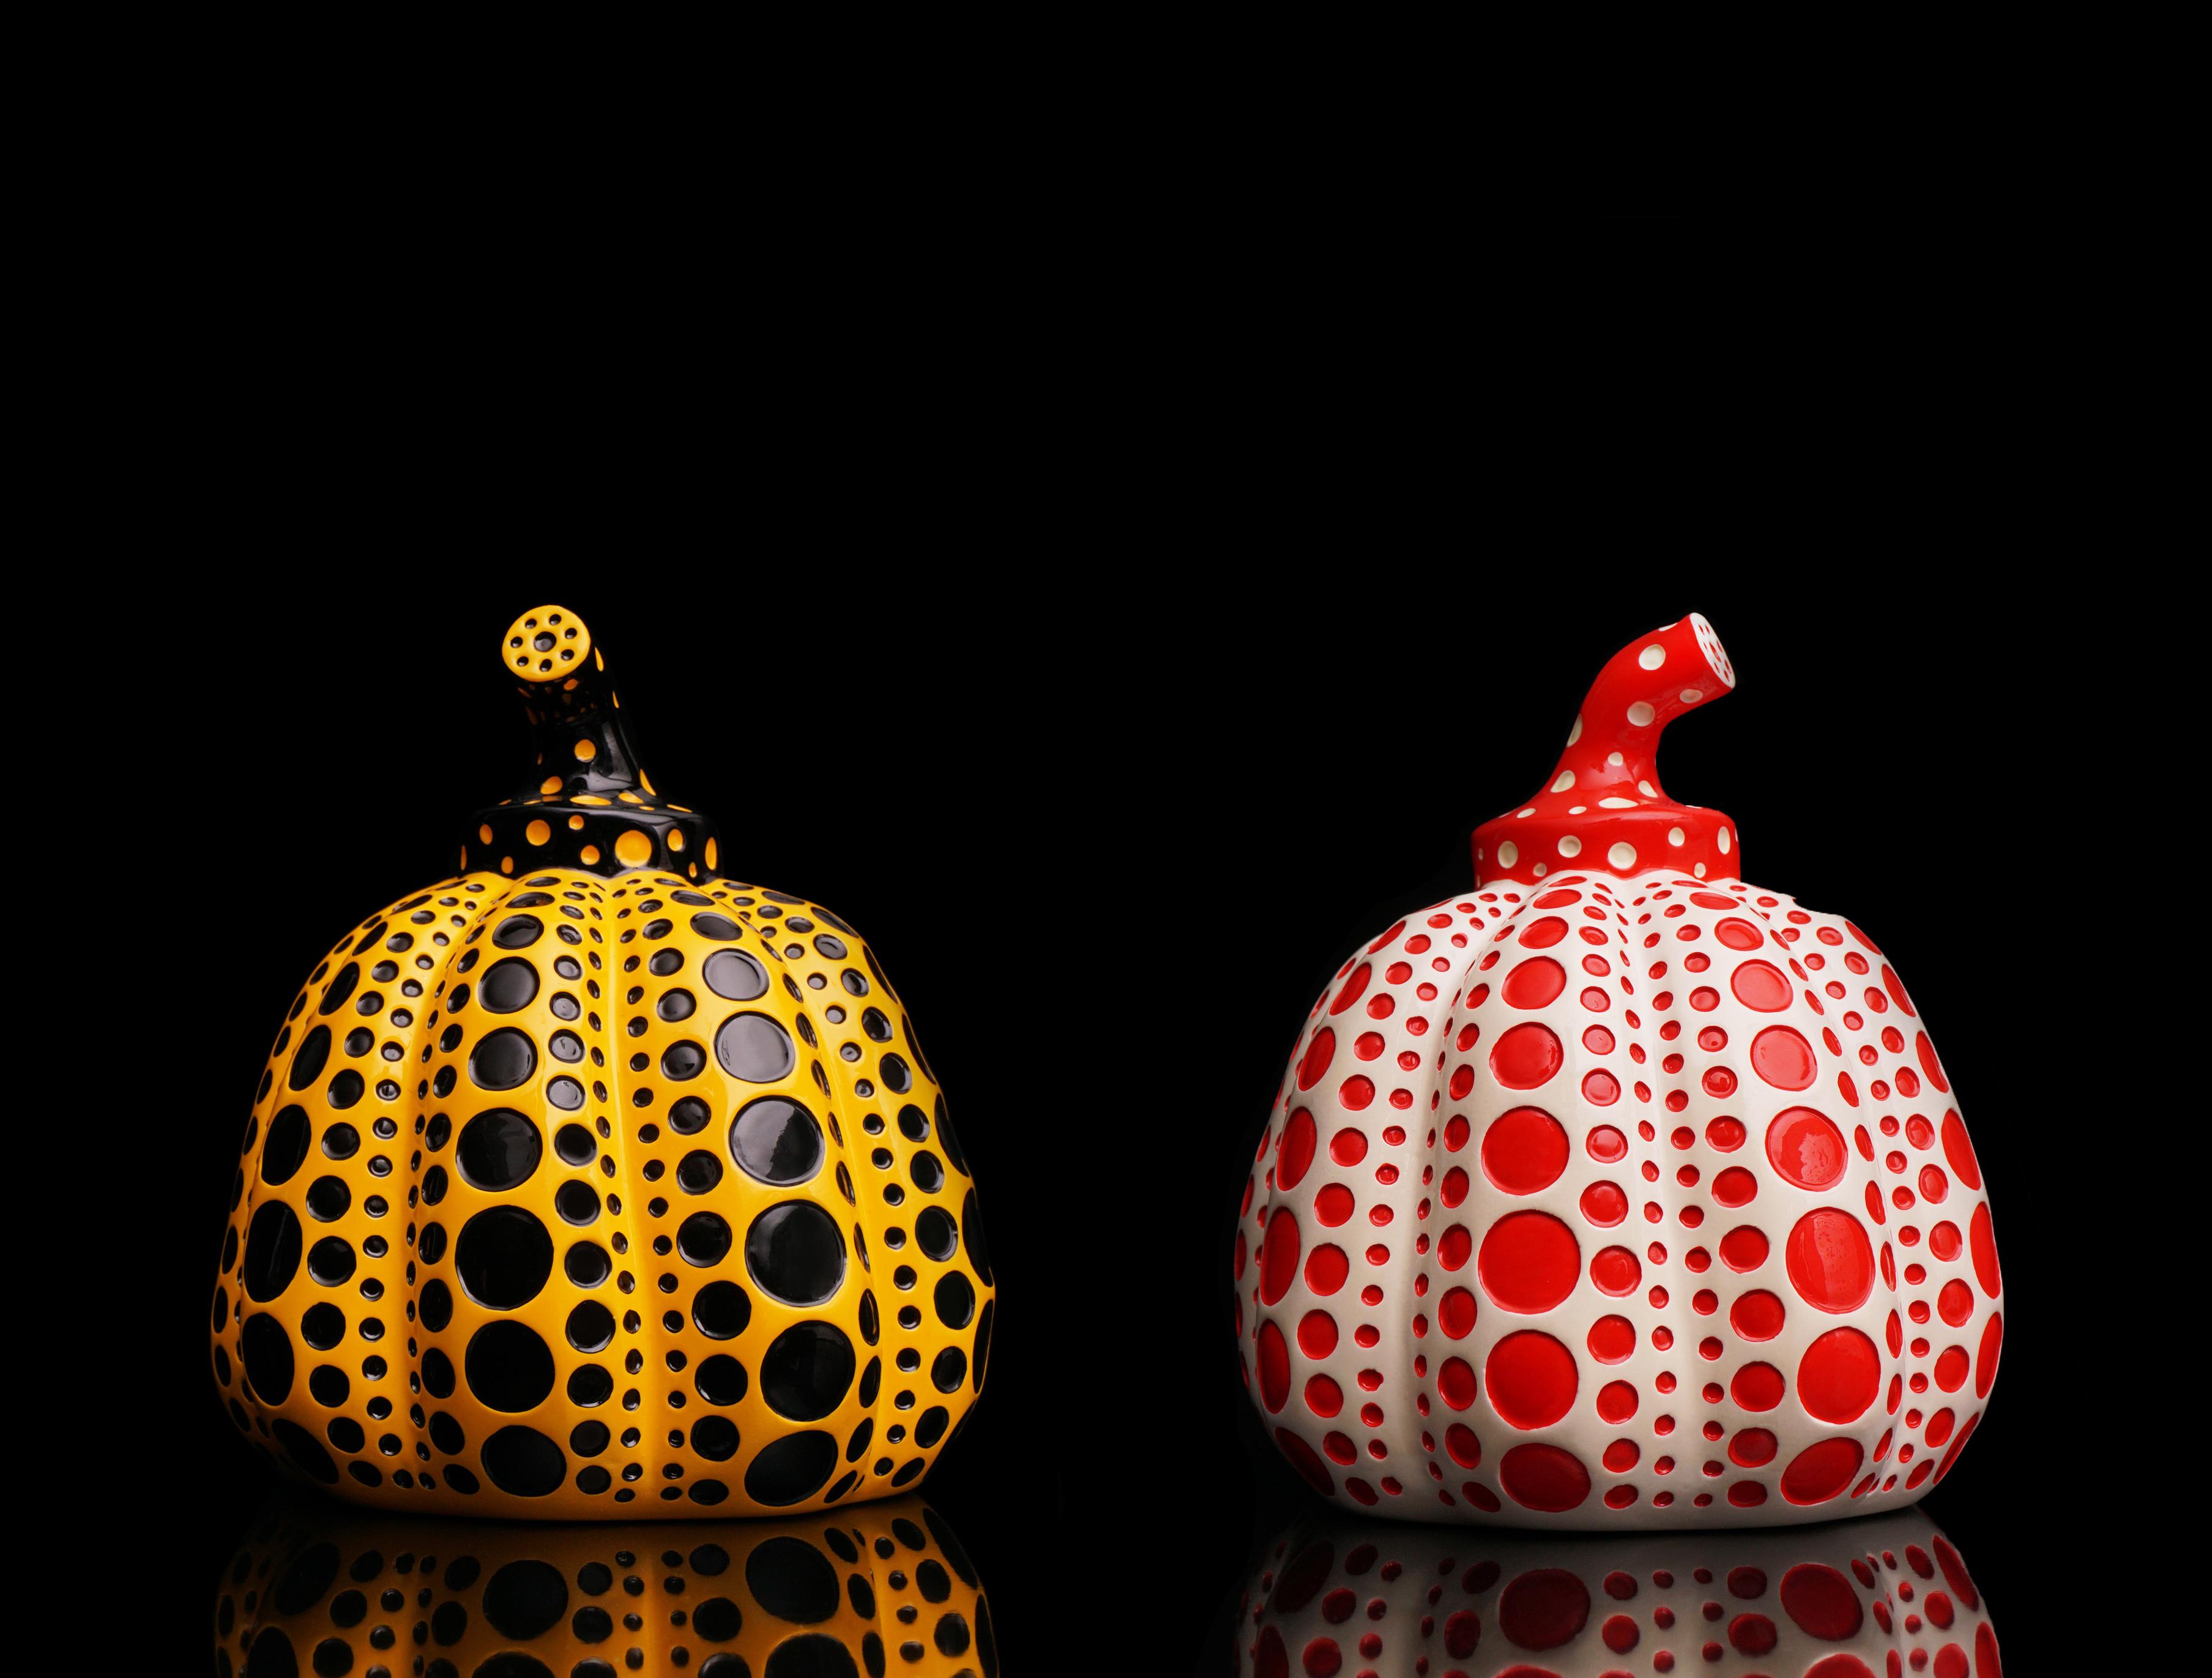 The ’Pumpkin' Set of Two sculptures are polka-dotted painted lacquer resin collectible art objects by the legendary contemporary Artist, Yayoi Kusama. Published by Benesse Holdings, Inc., Naoshima, Japan. Created in 2016, the polka-dot pumpkin